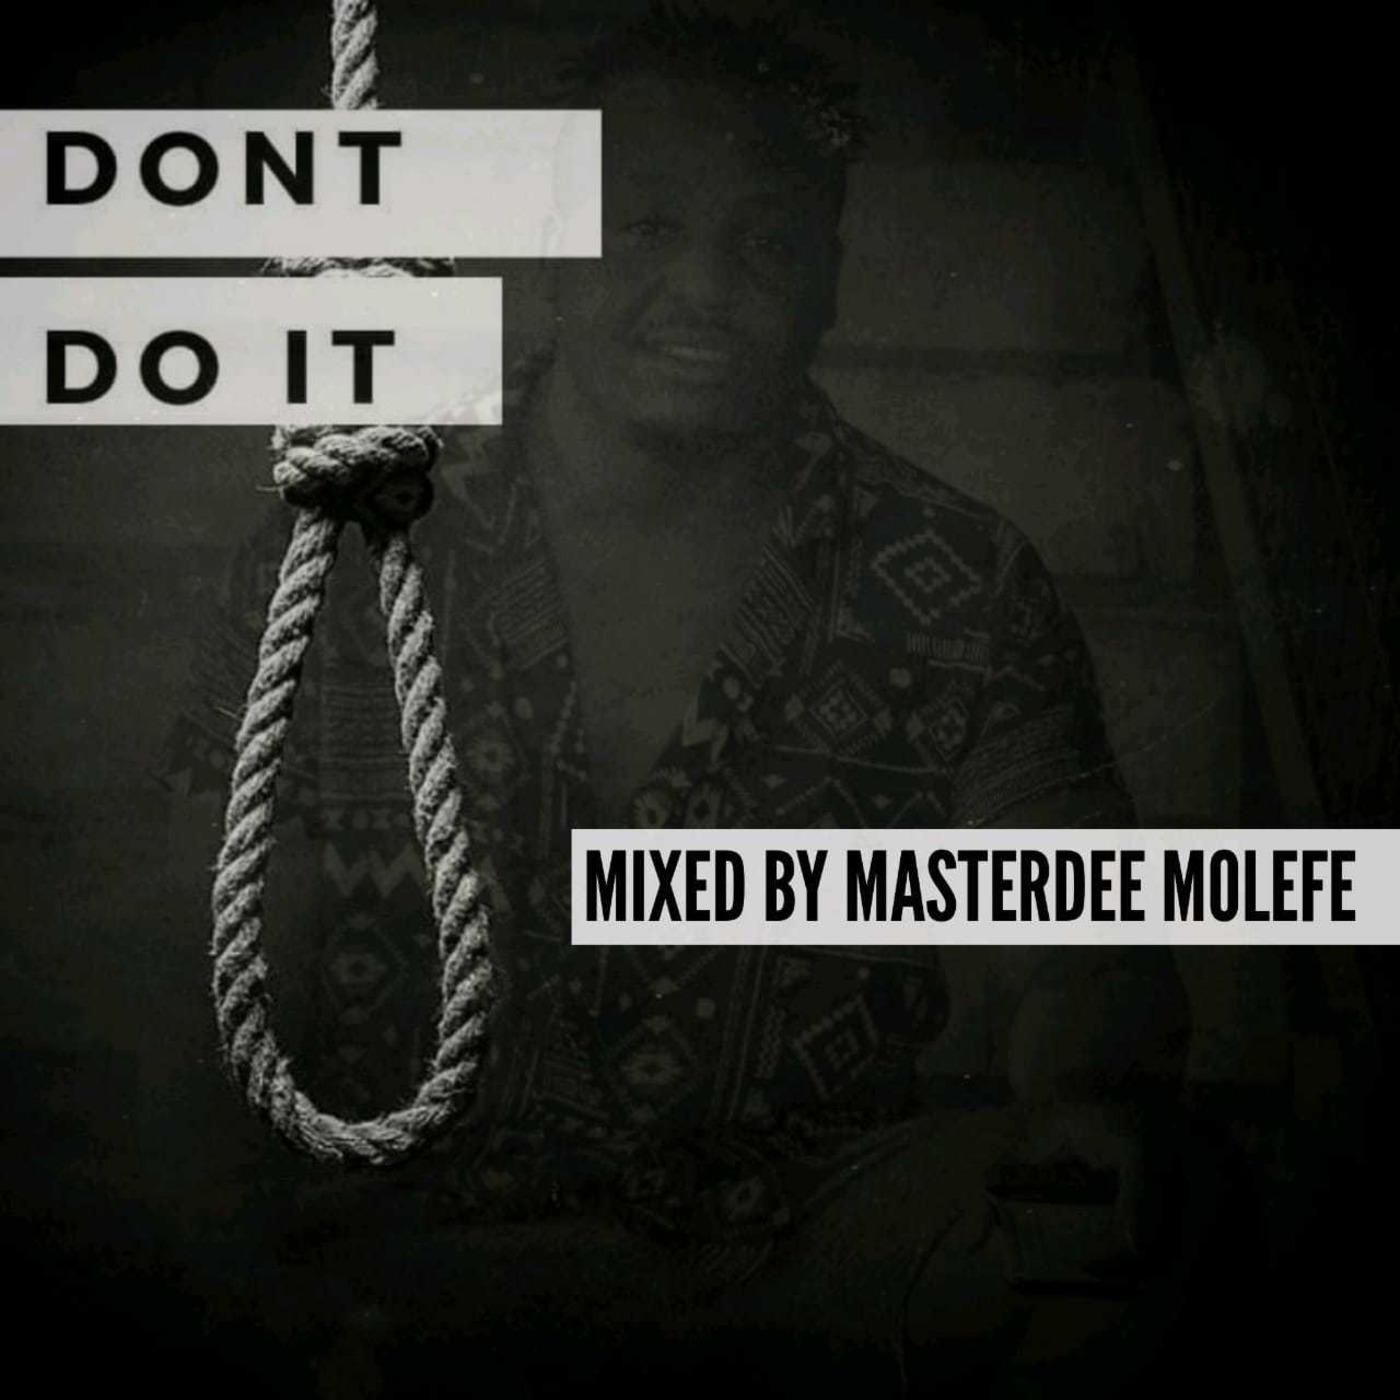 DONT DO IT - Mixed By Masterdee Molefe